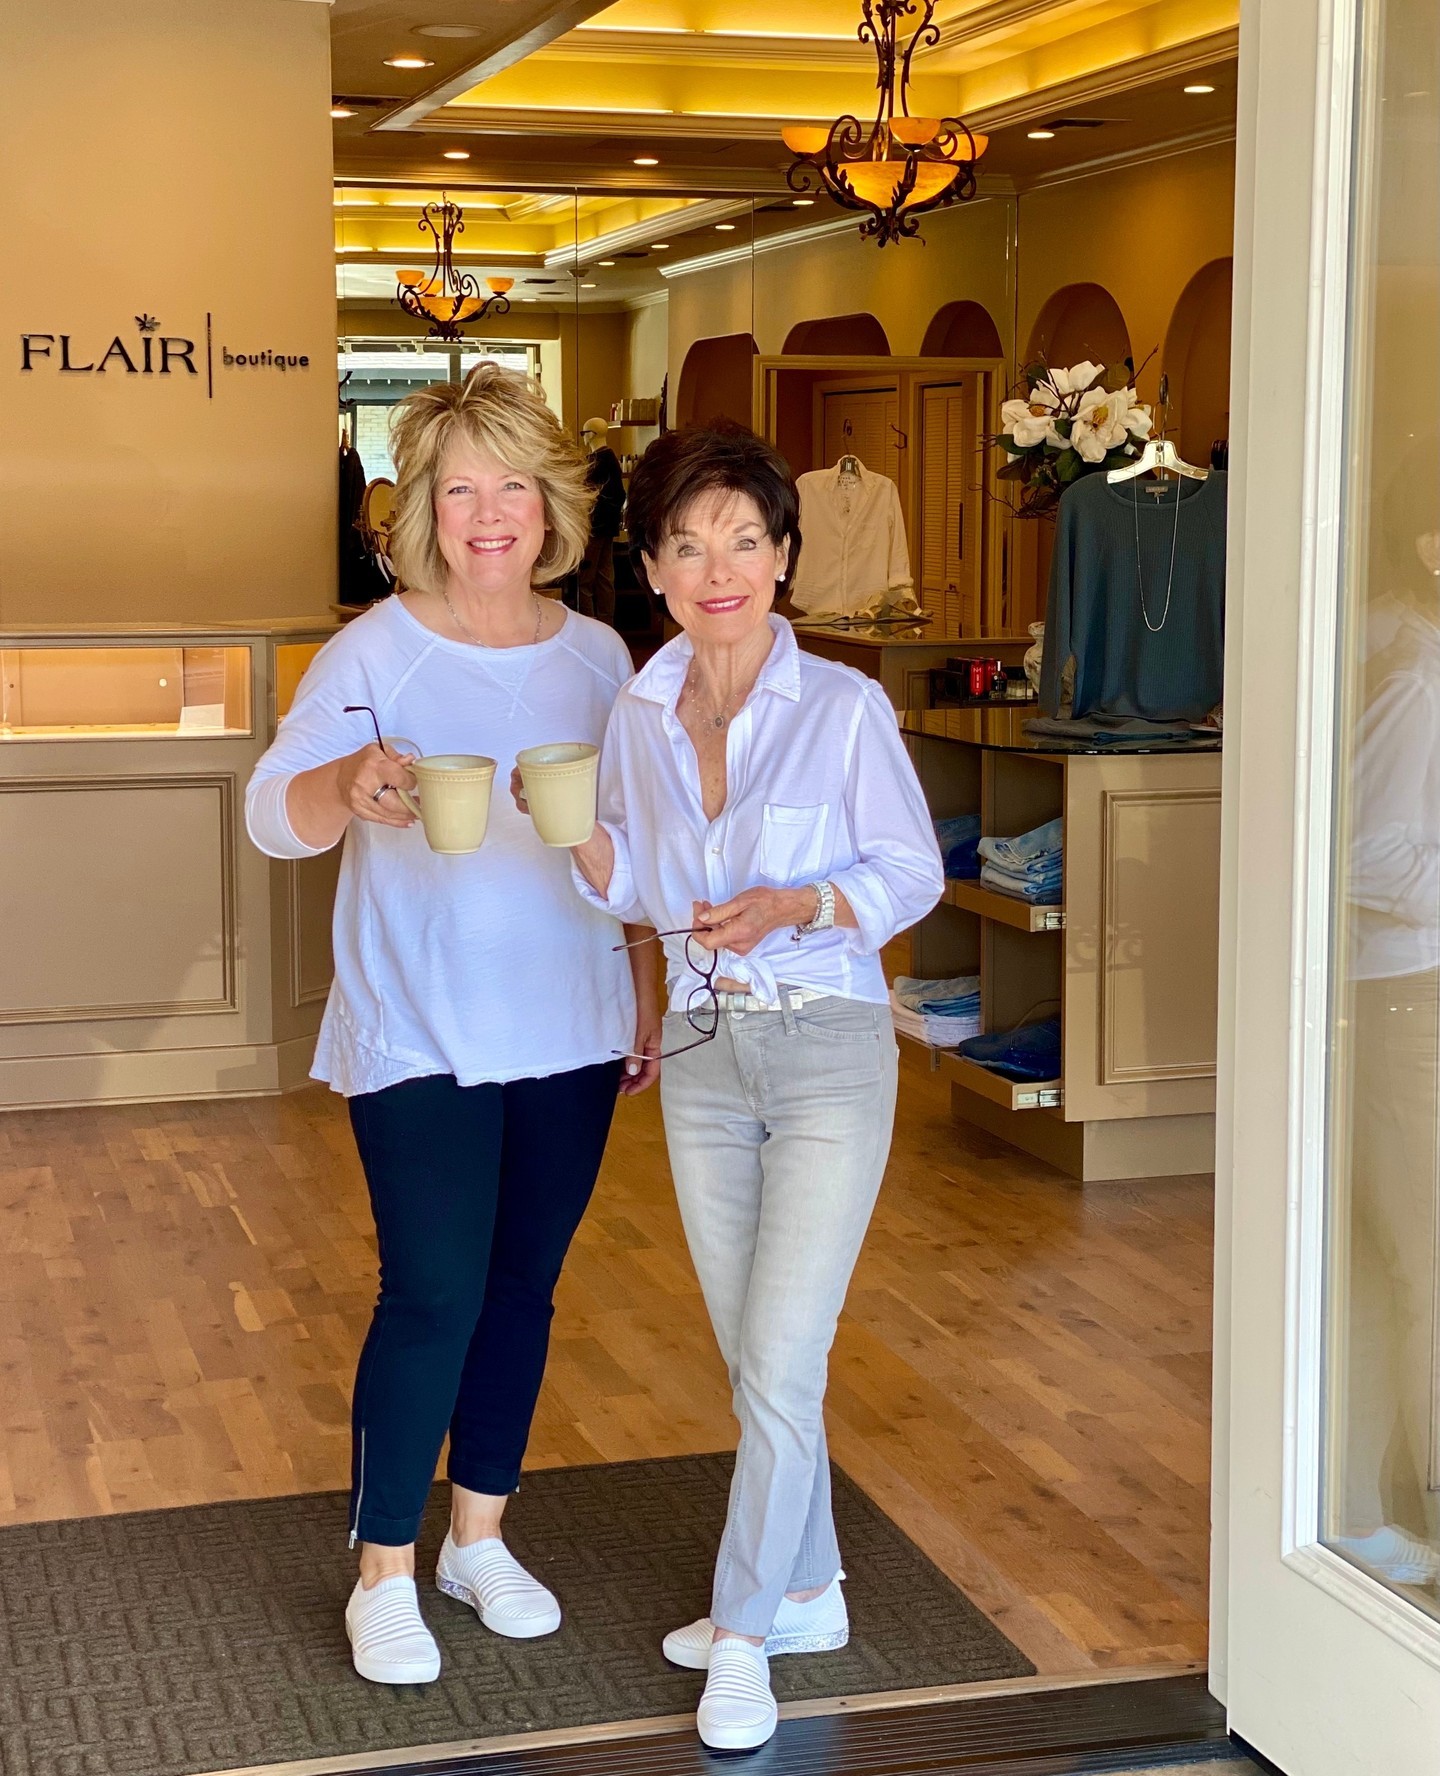 Good morning from @flairboutiquestockton! ☕ Today is the SIDEWALK SALE! 🛍️ Grab your coffee from @starbuckslincolncenter and head on over! 🙌 Sale starts at 9am!